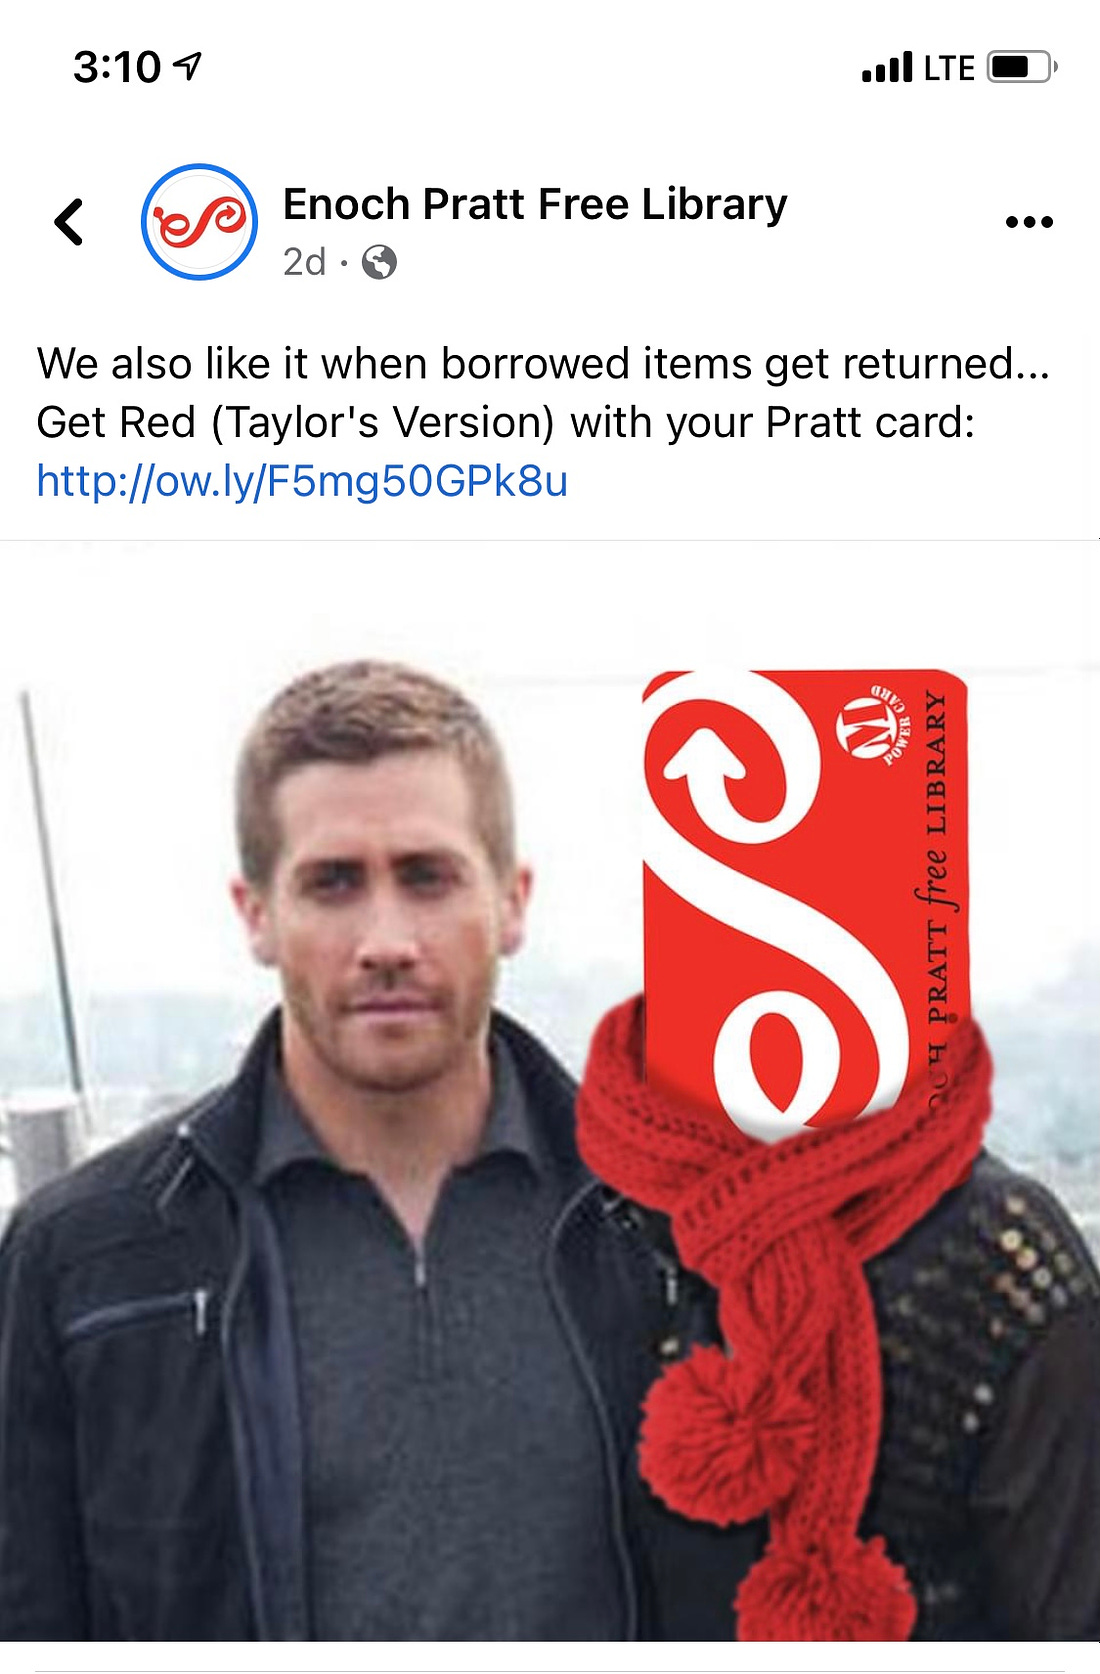 Picture of Jake G. with a woman with a library card for a face and a red scarf.  Text reads "we also like it when borrowed items get returne....Get Red (Taylor's Version) with your Pratt card:"